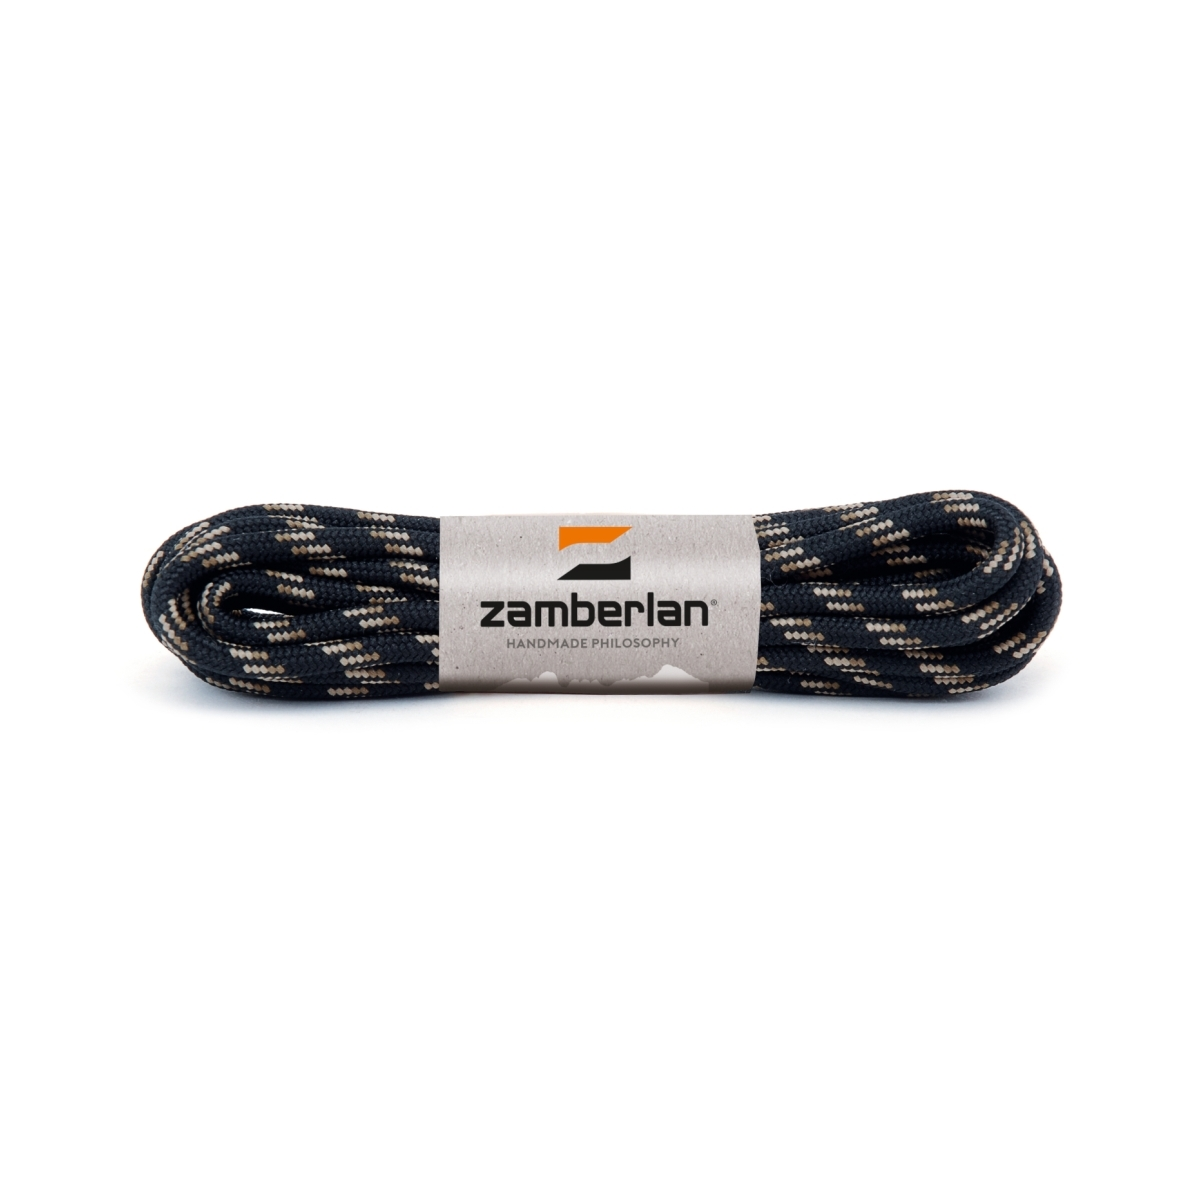 Zamberlan Round Laces - Black/Beige 175cm -  - Mansfield Hunting & Fishing - Products to prepare for Corona Virus